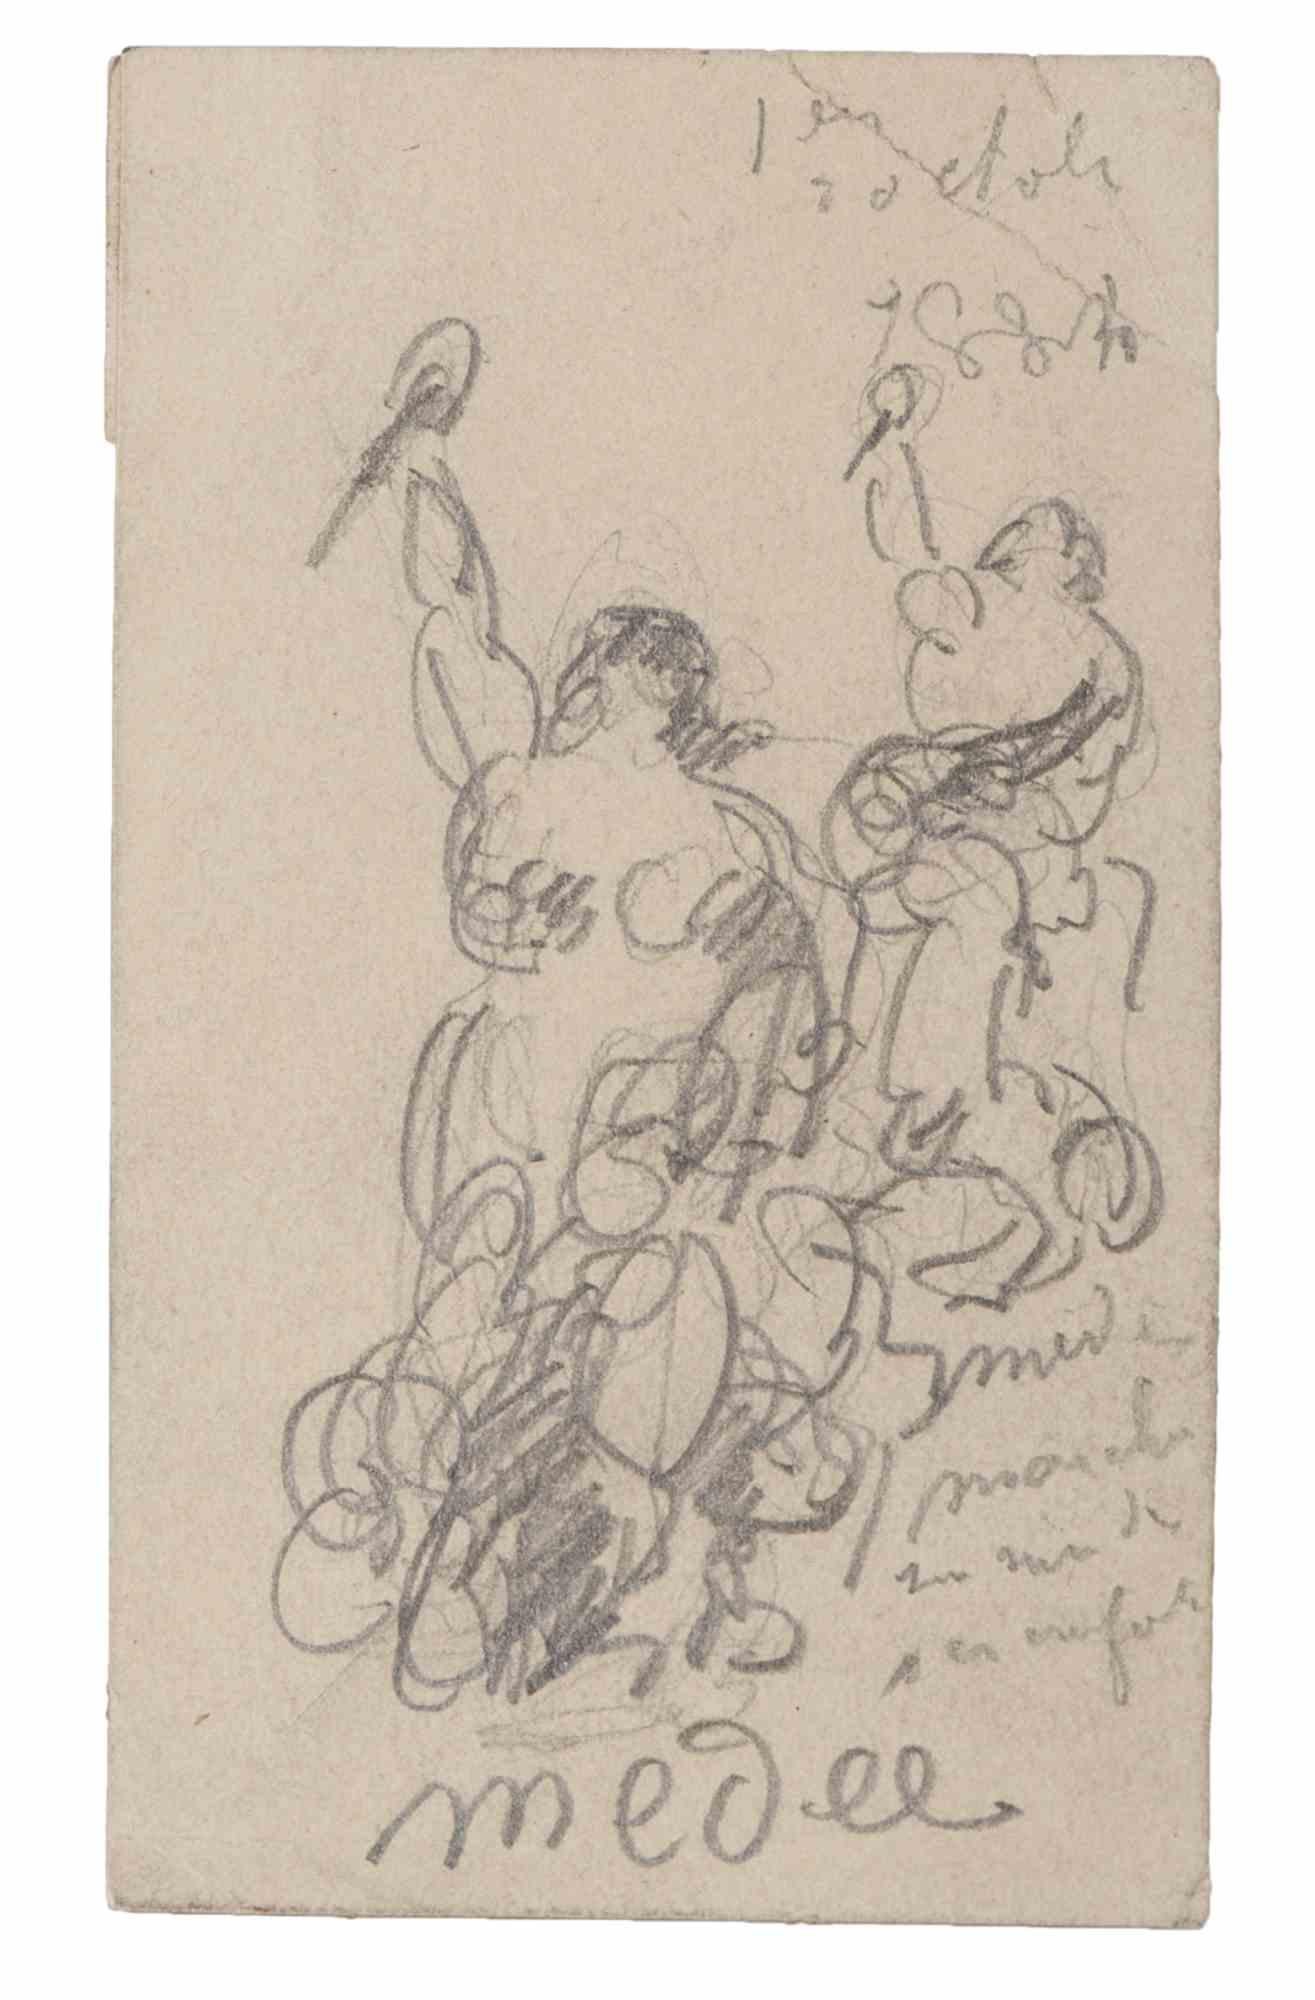 Unknown Figurative Art - Medée - Original Pencil Drawing - Early 20th Century